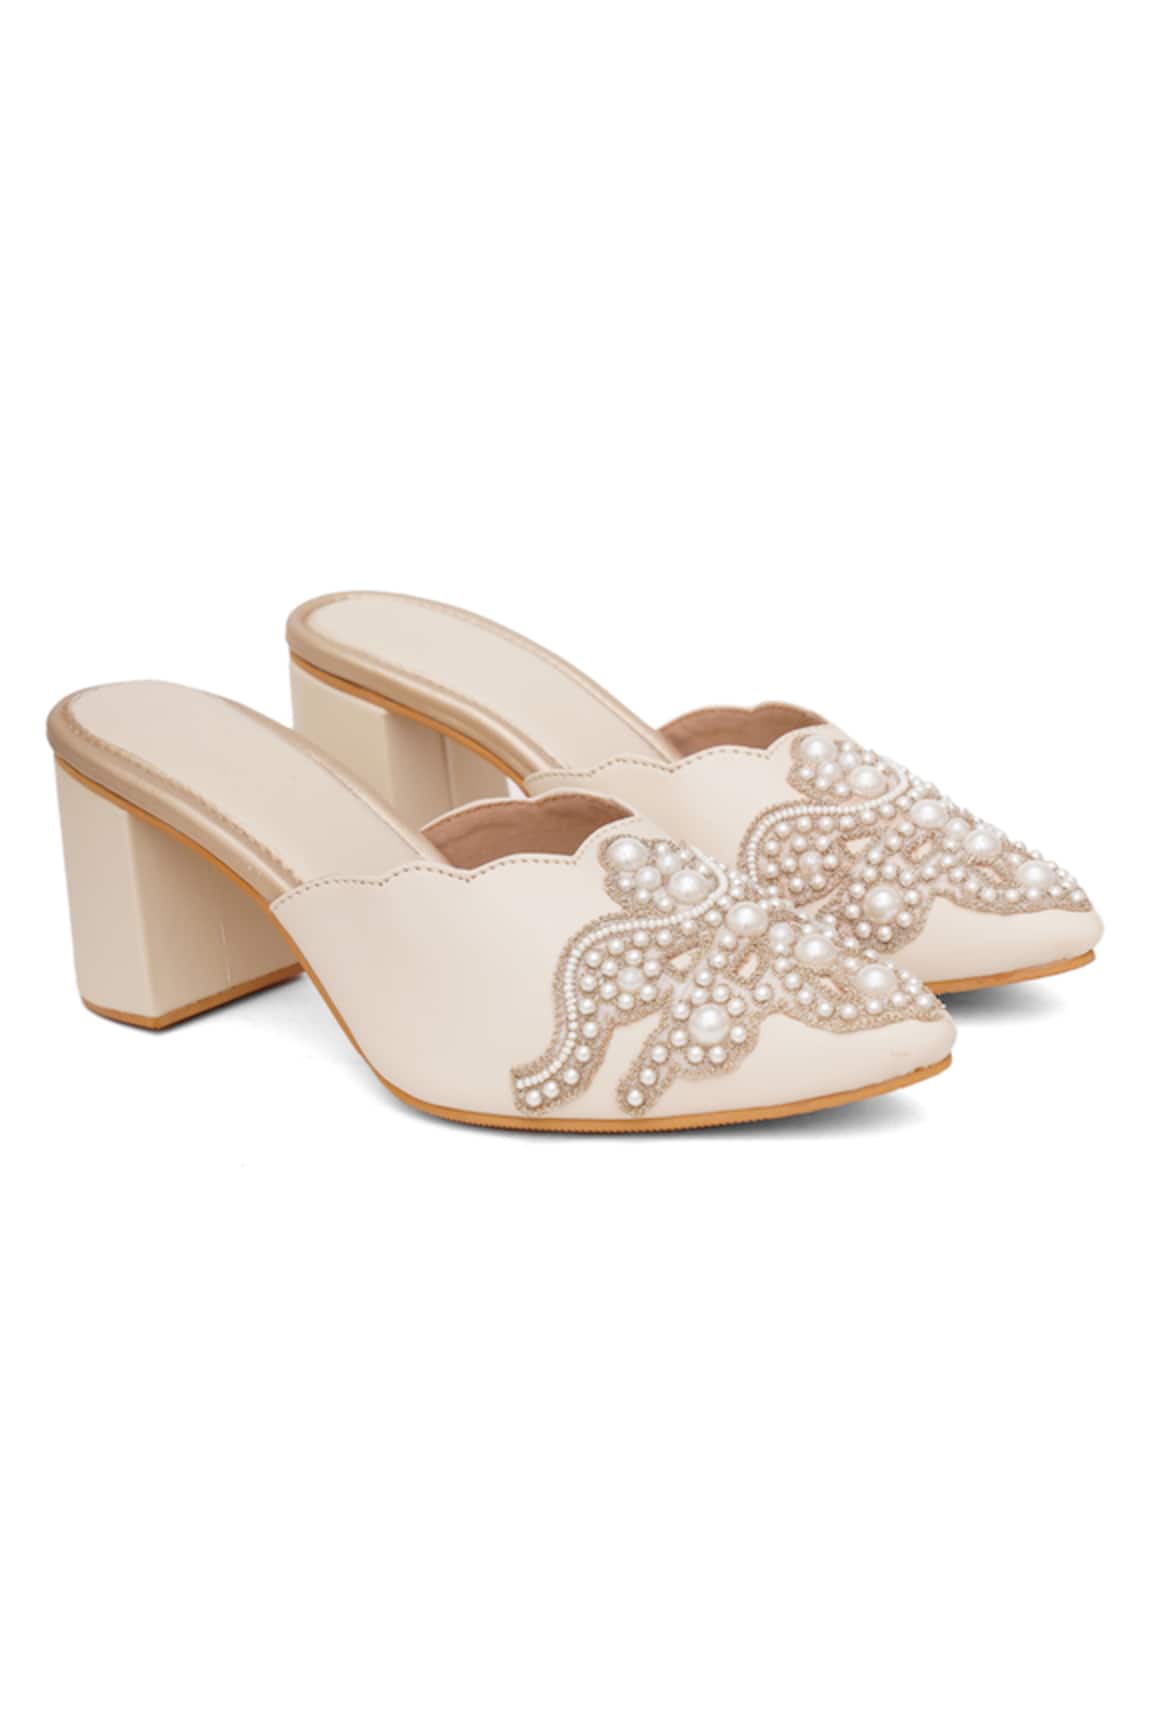 Sole House Pearl Floral Embroidered Mule Heels